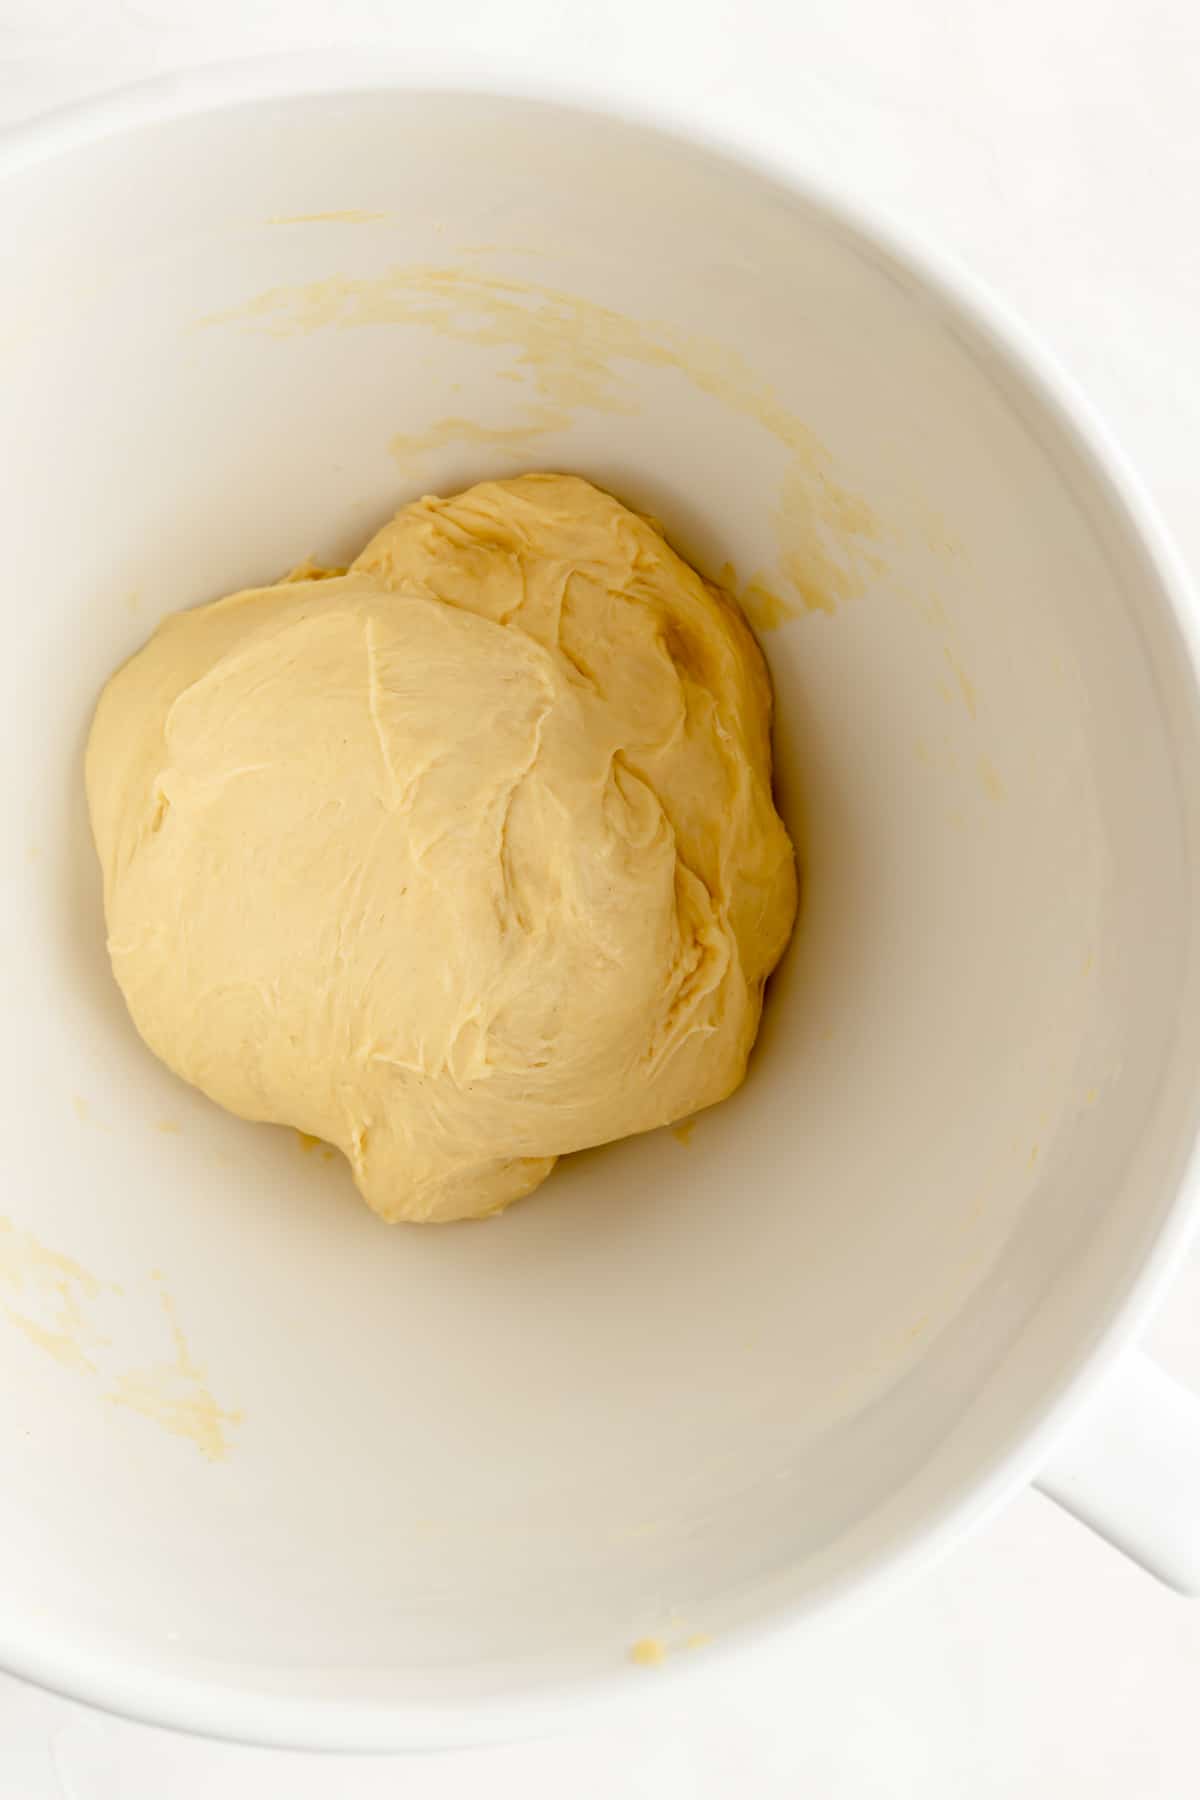 Partially developed ball of brioche dough in the bottom of a white bowl.